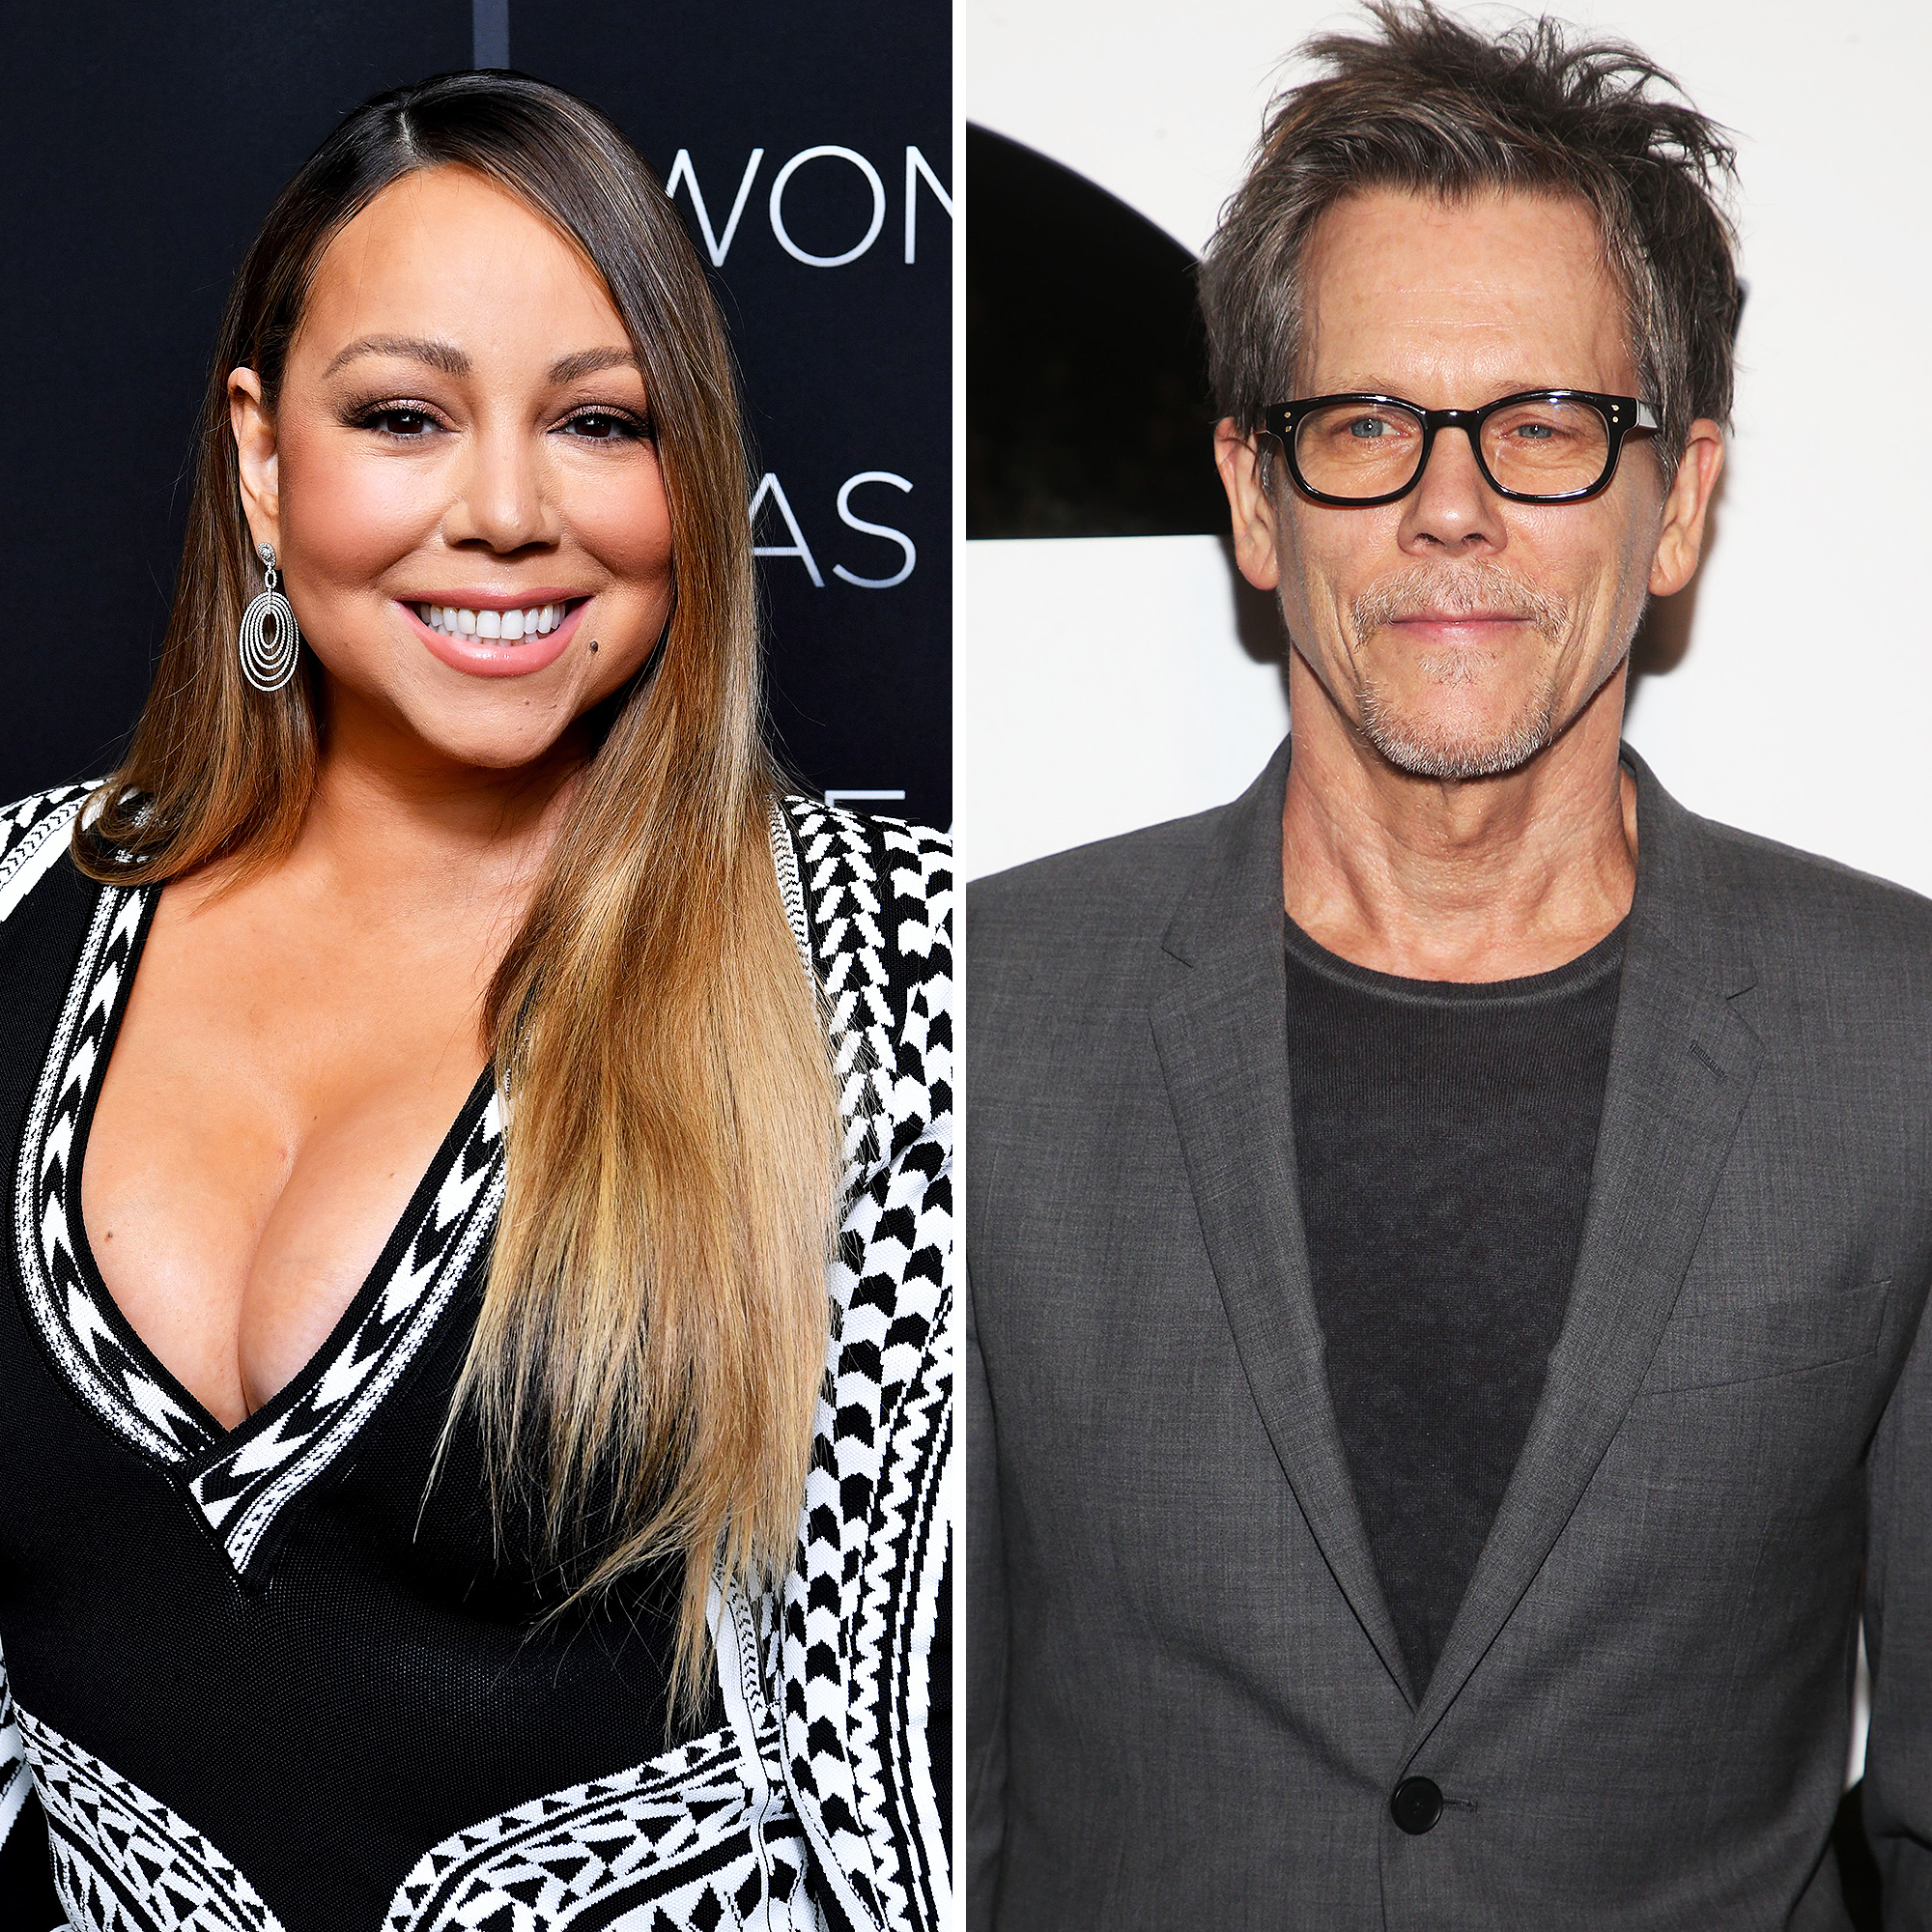 Mariah Carey Porn Captions - Mariah Carey, Kevin Bacon to Appear on 'Heroes of New York'